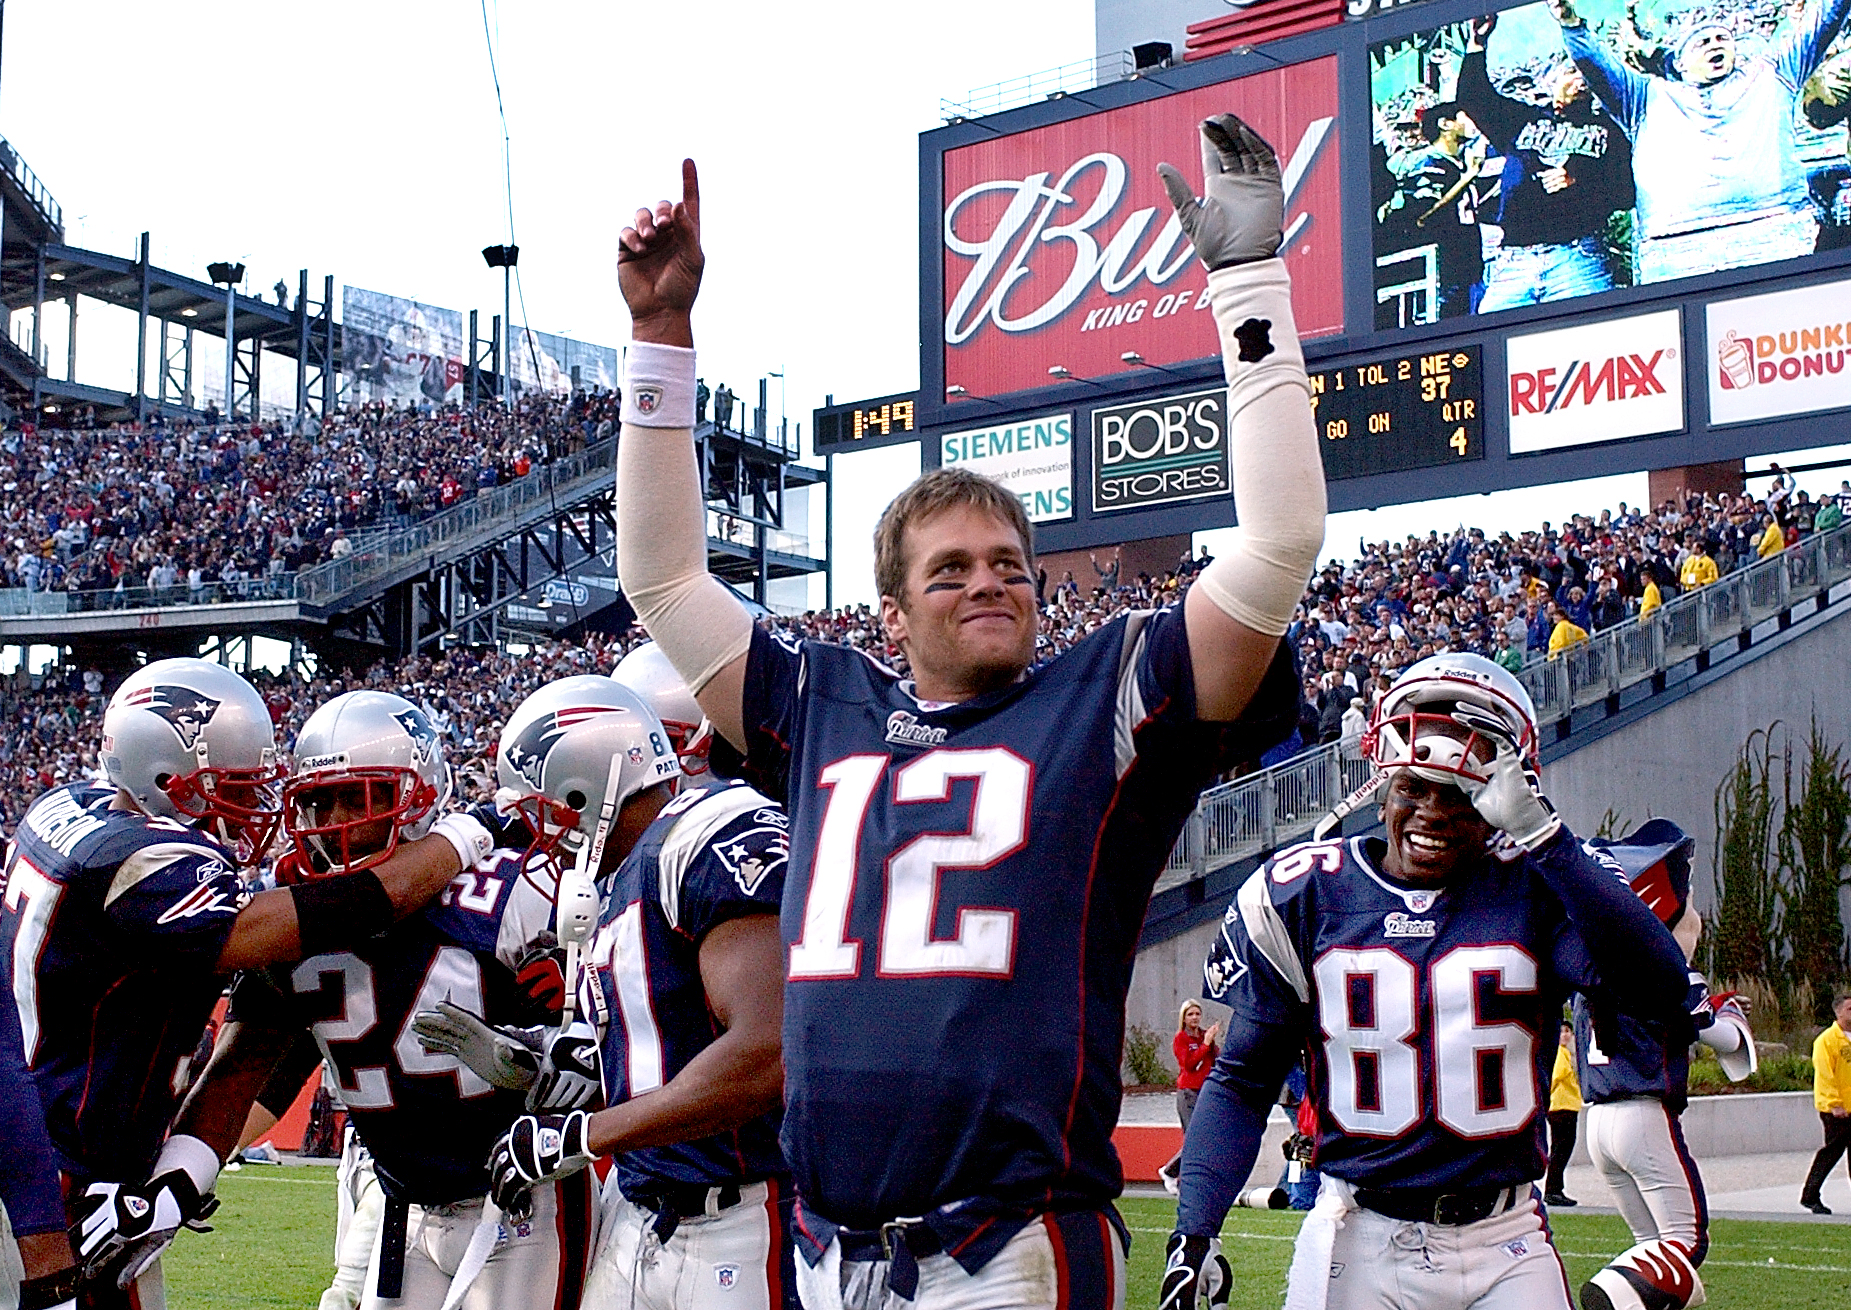 Tom Brady returns to hero's welcome in New England and declares